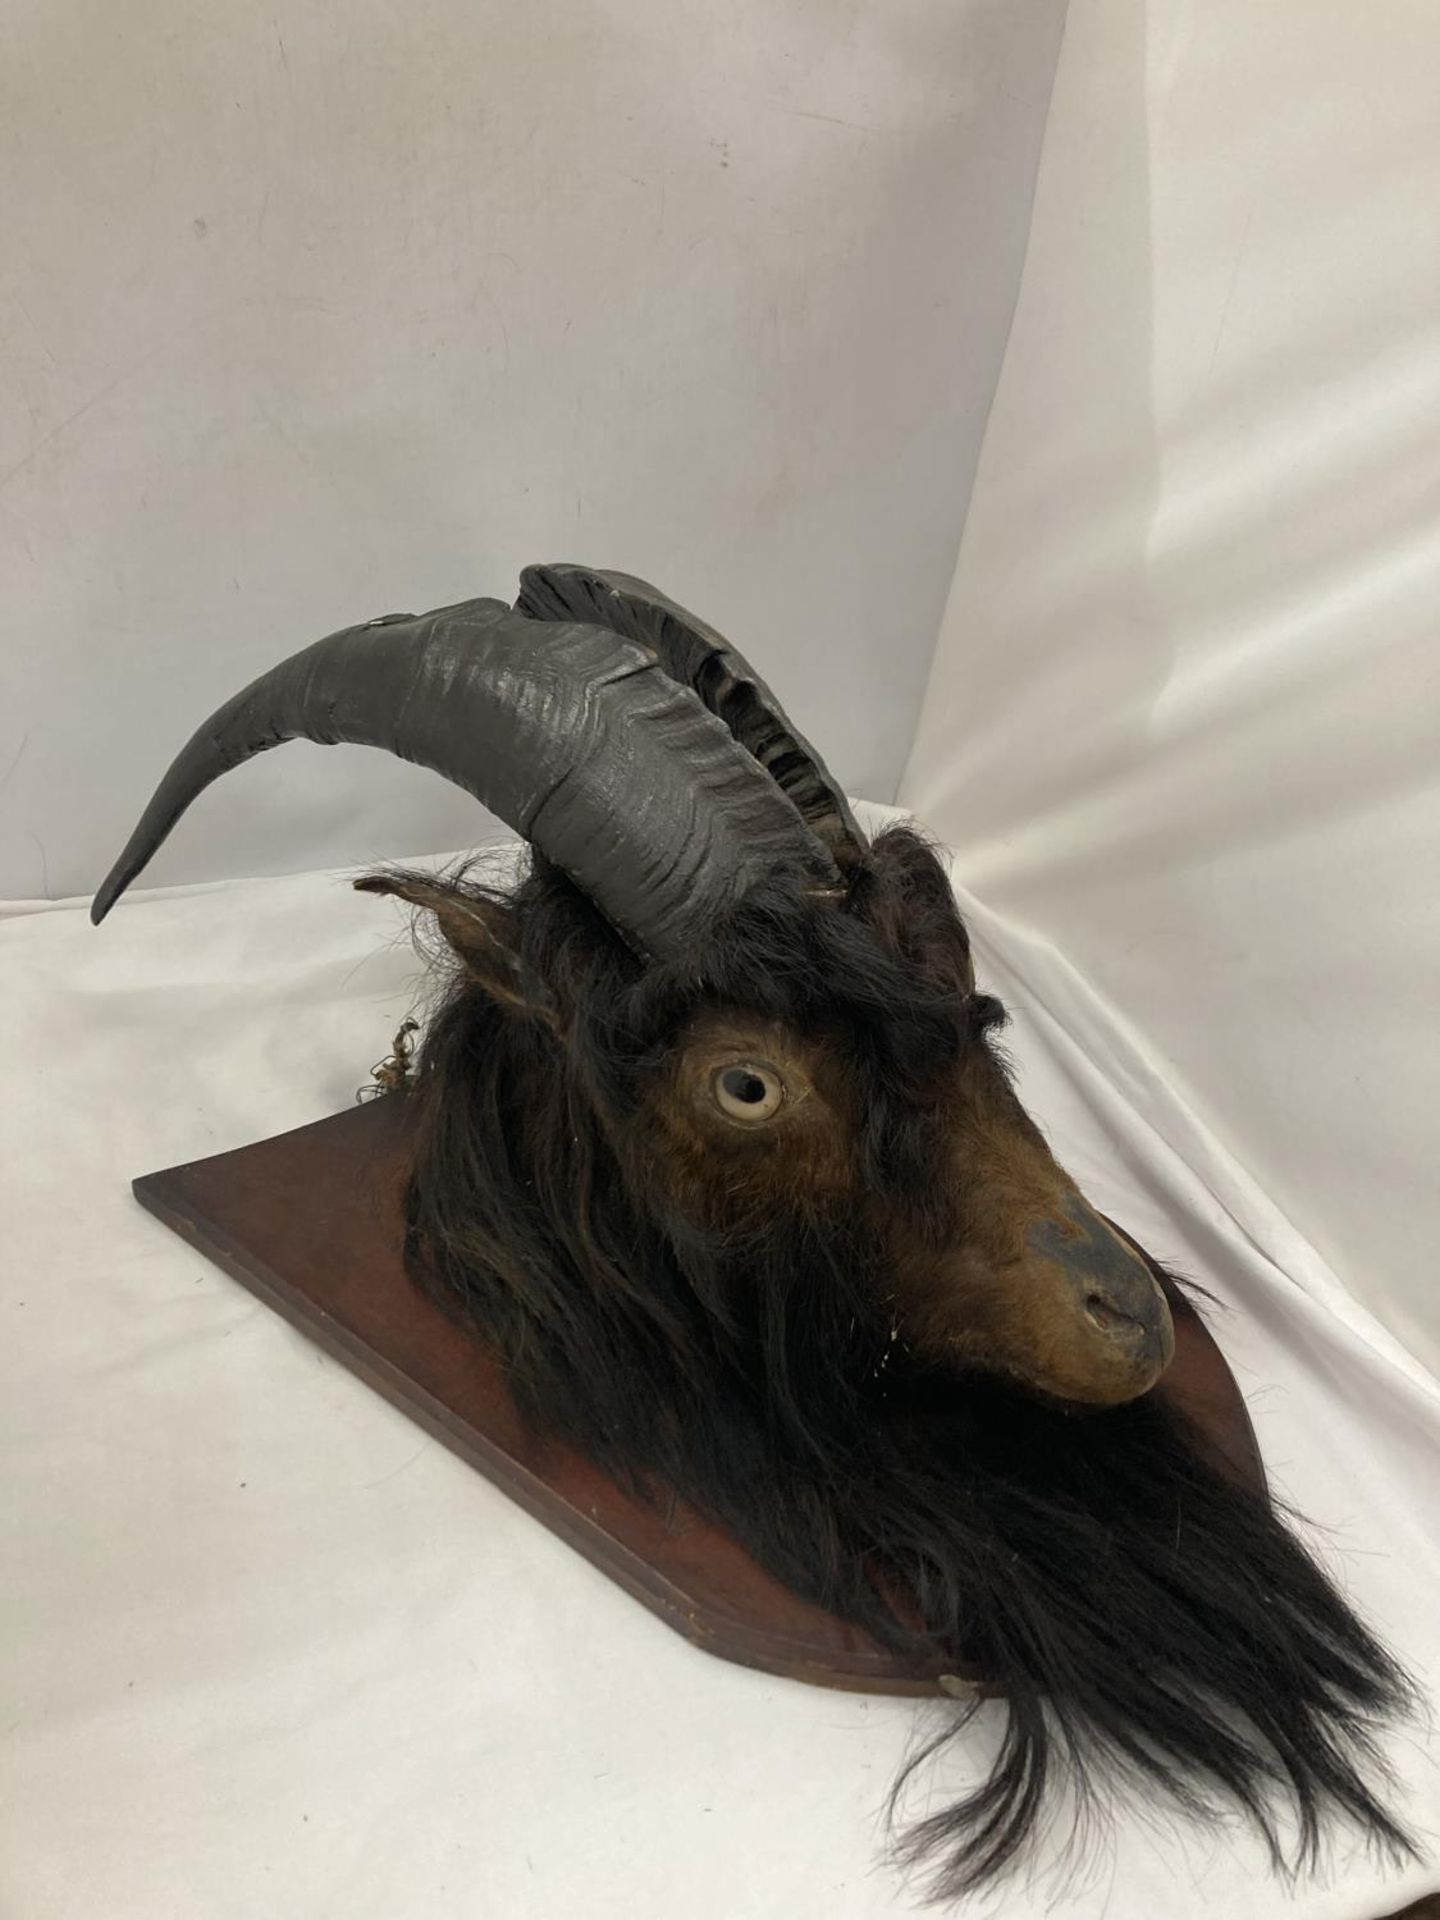 A TAXIDERMY GOAT HEAD ON A WOODEN PLAQUE - Image 3 of 5